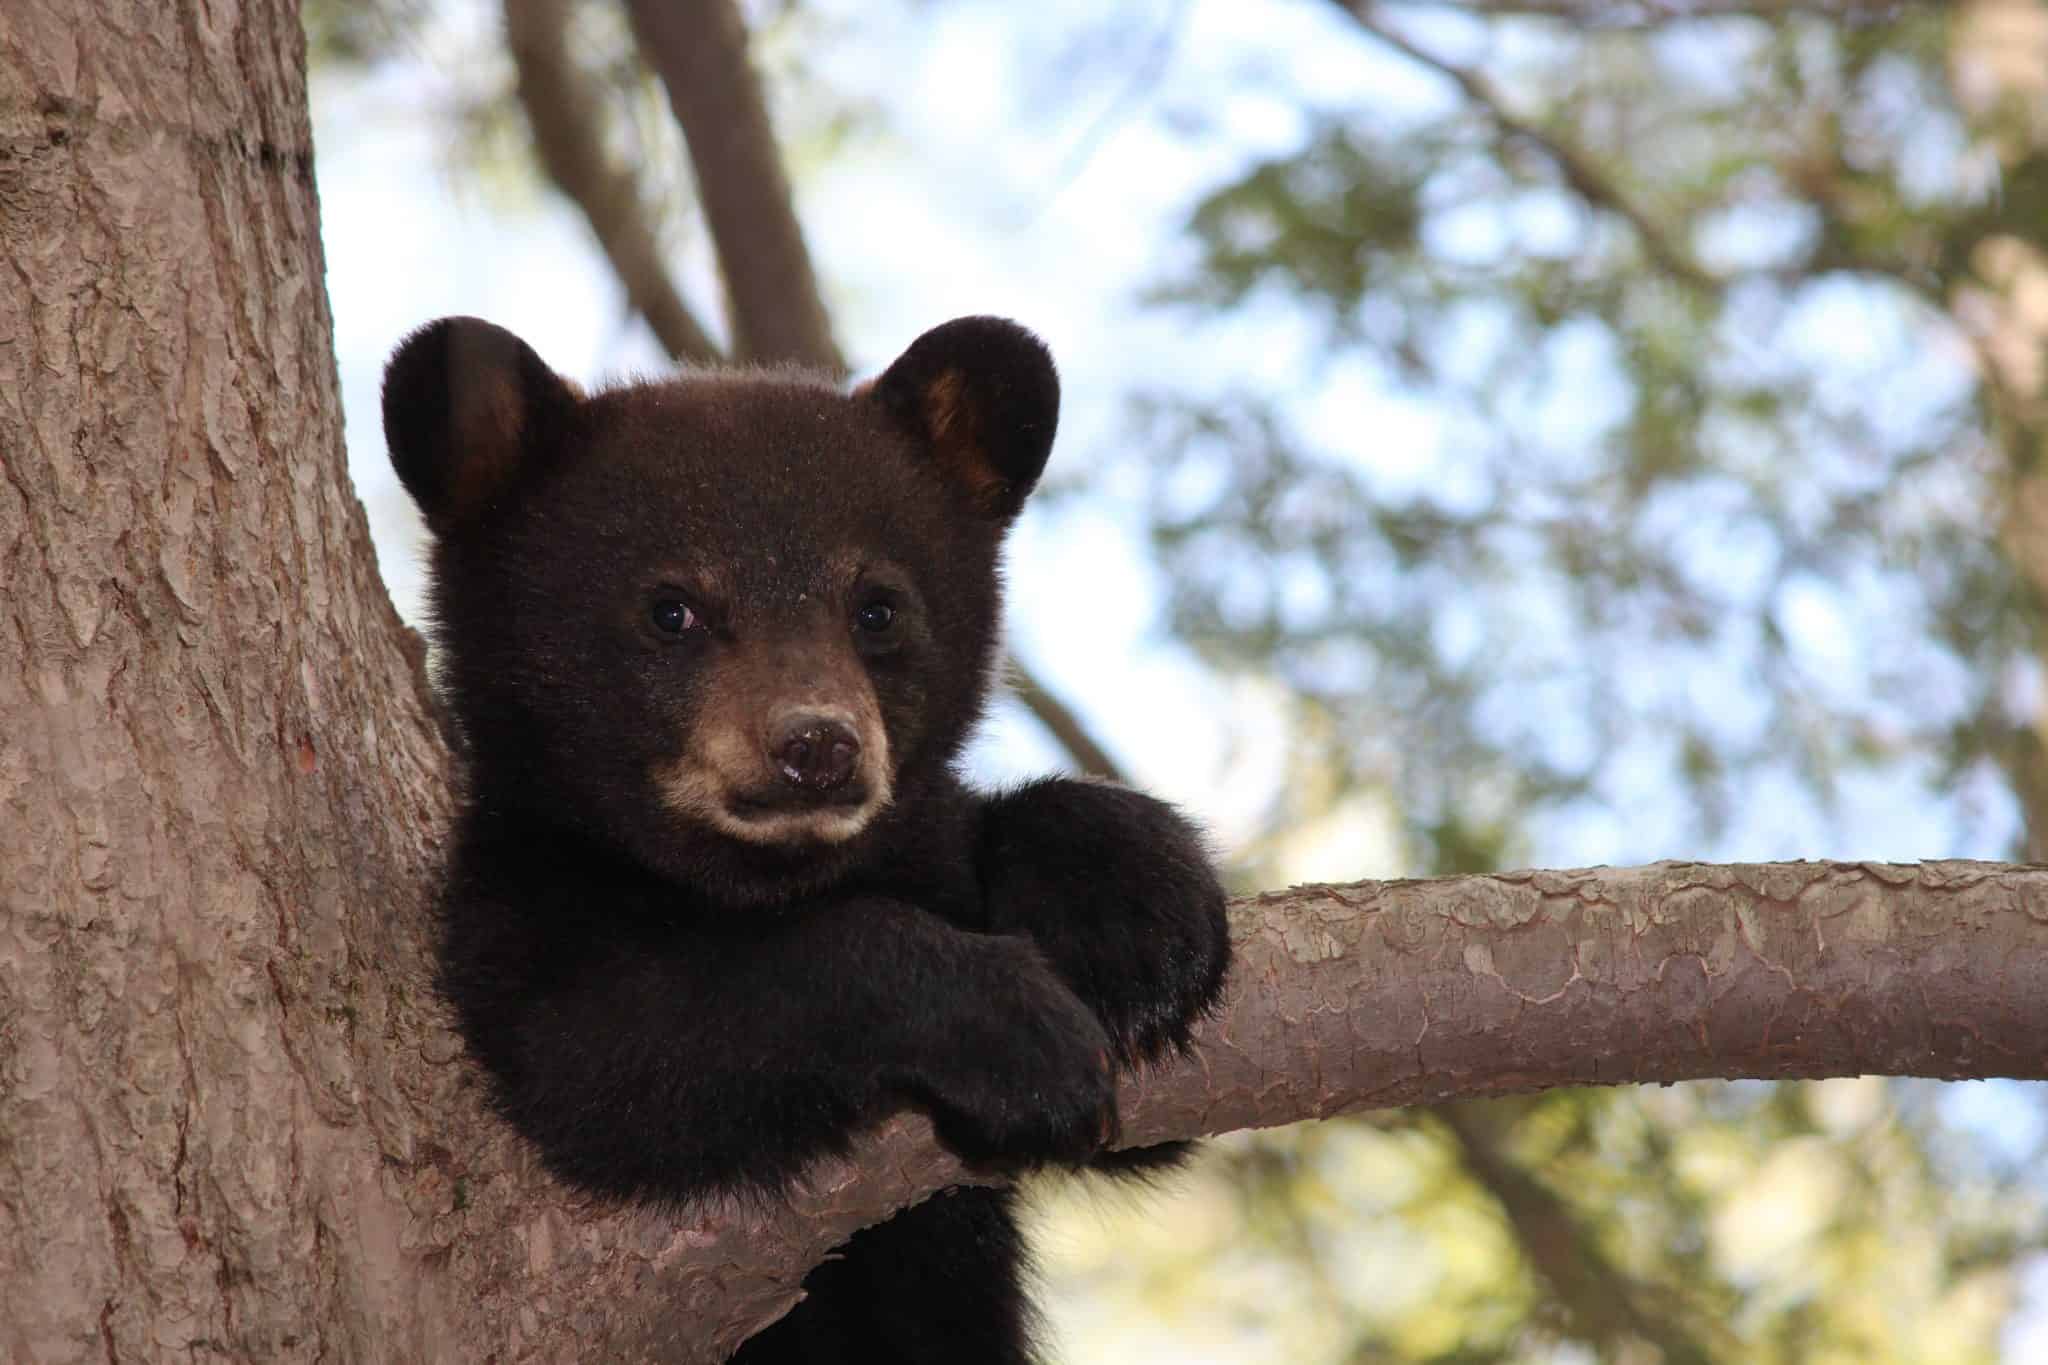 Petition: Stop Black Bear From Getting Euthanized Because Humans Encroached on His Habitat